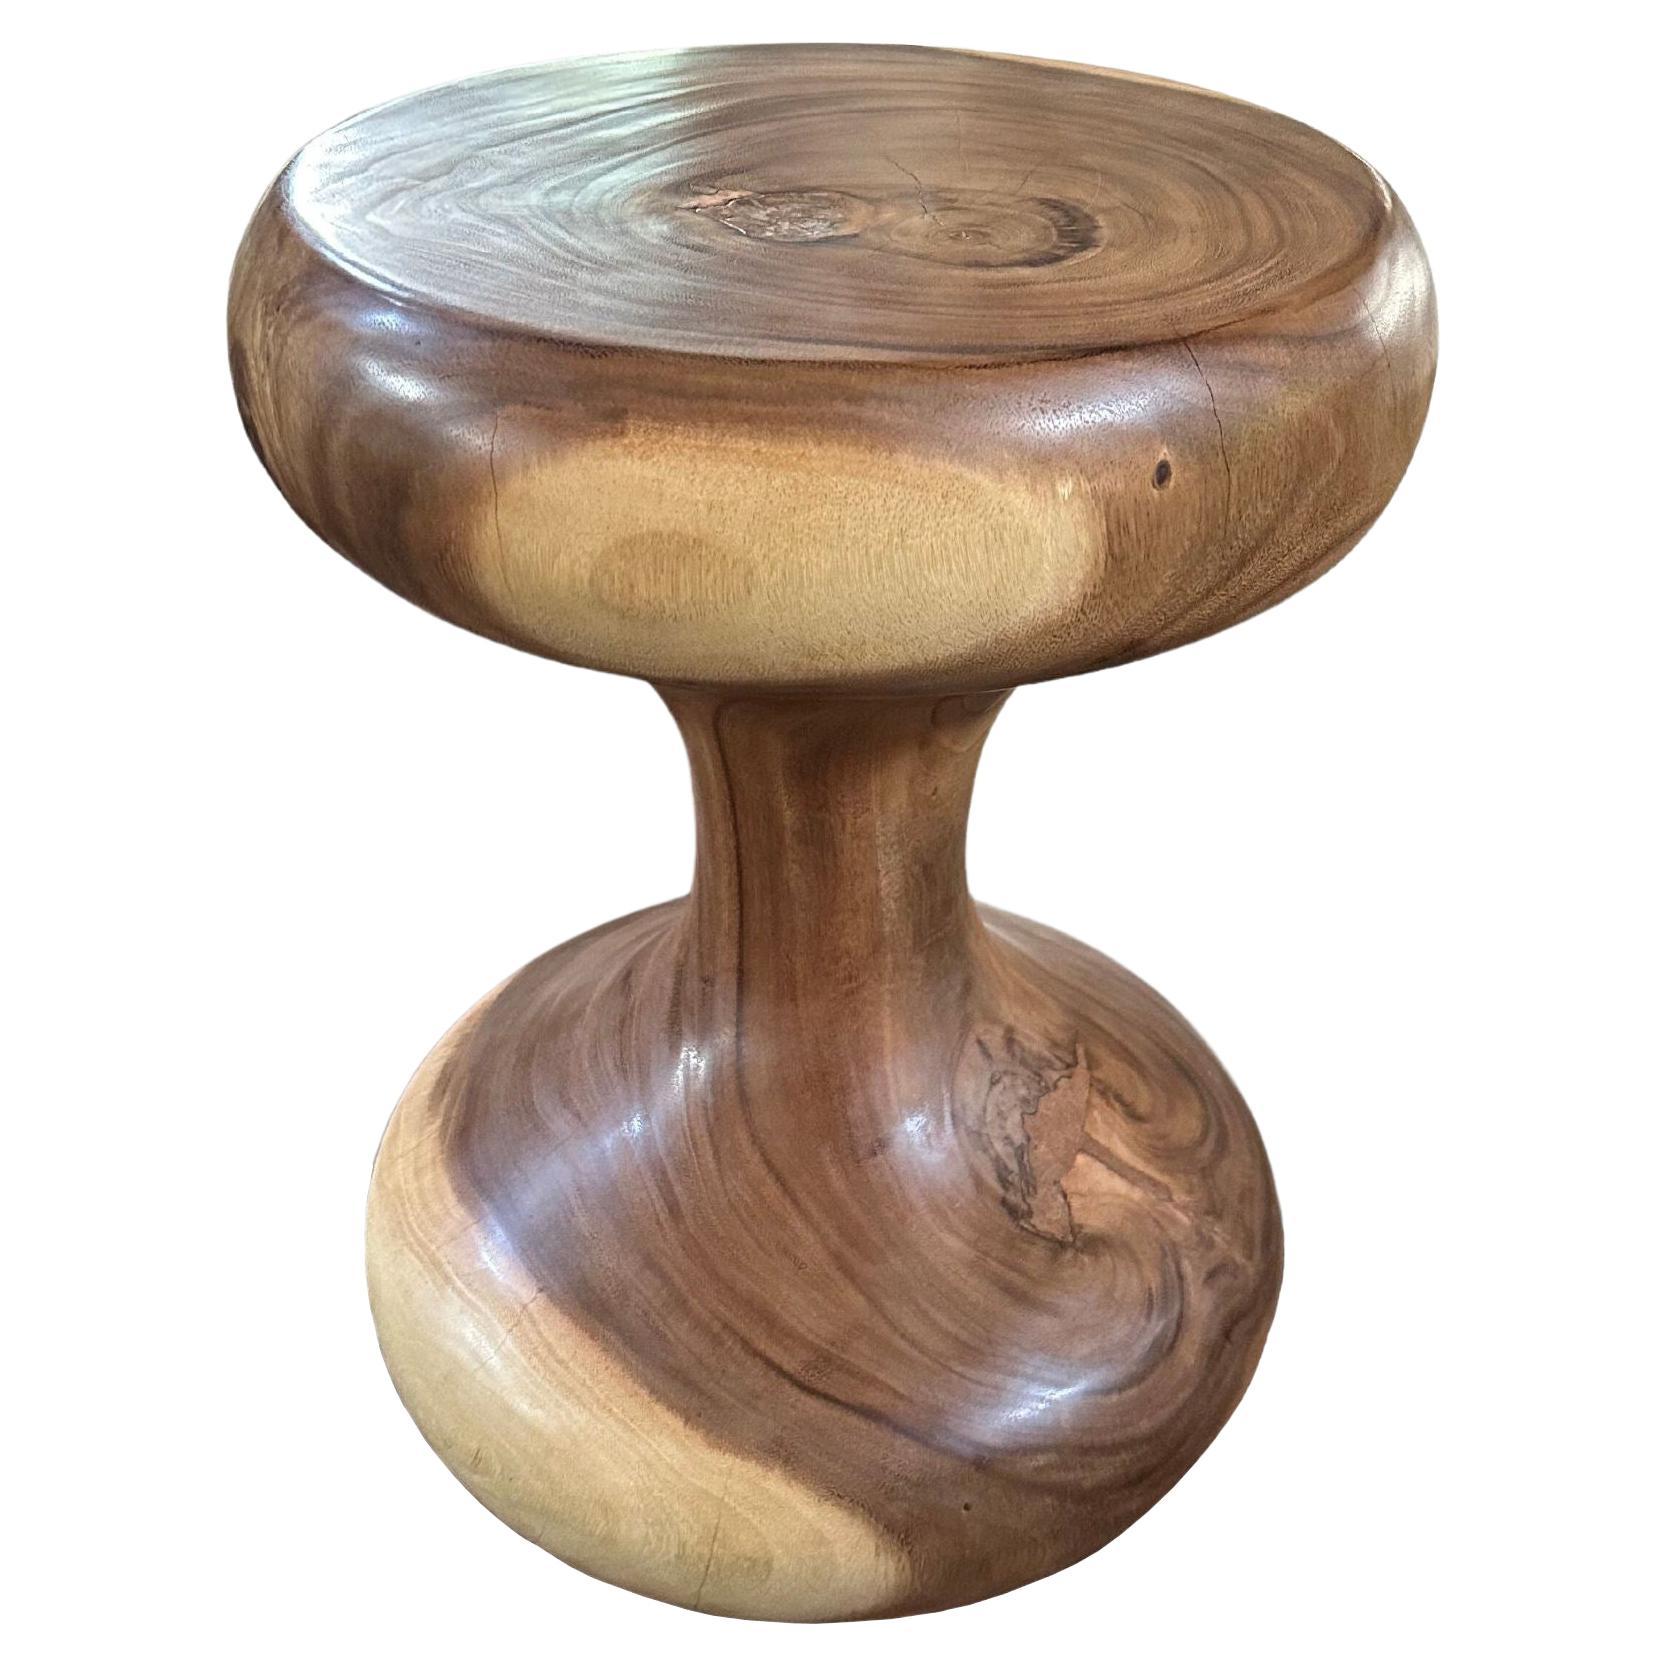 Sculptural Suar Wood Side Table, with Stunning Wood Textures, Modern Organic For Sale